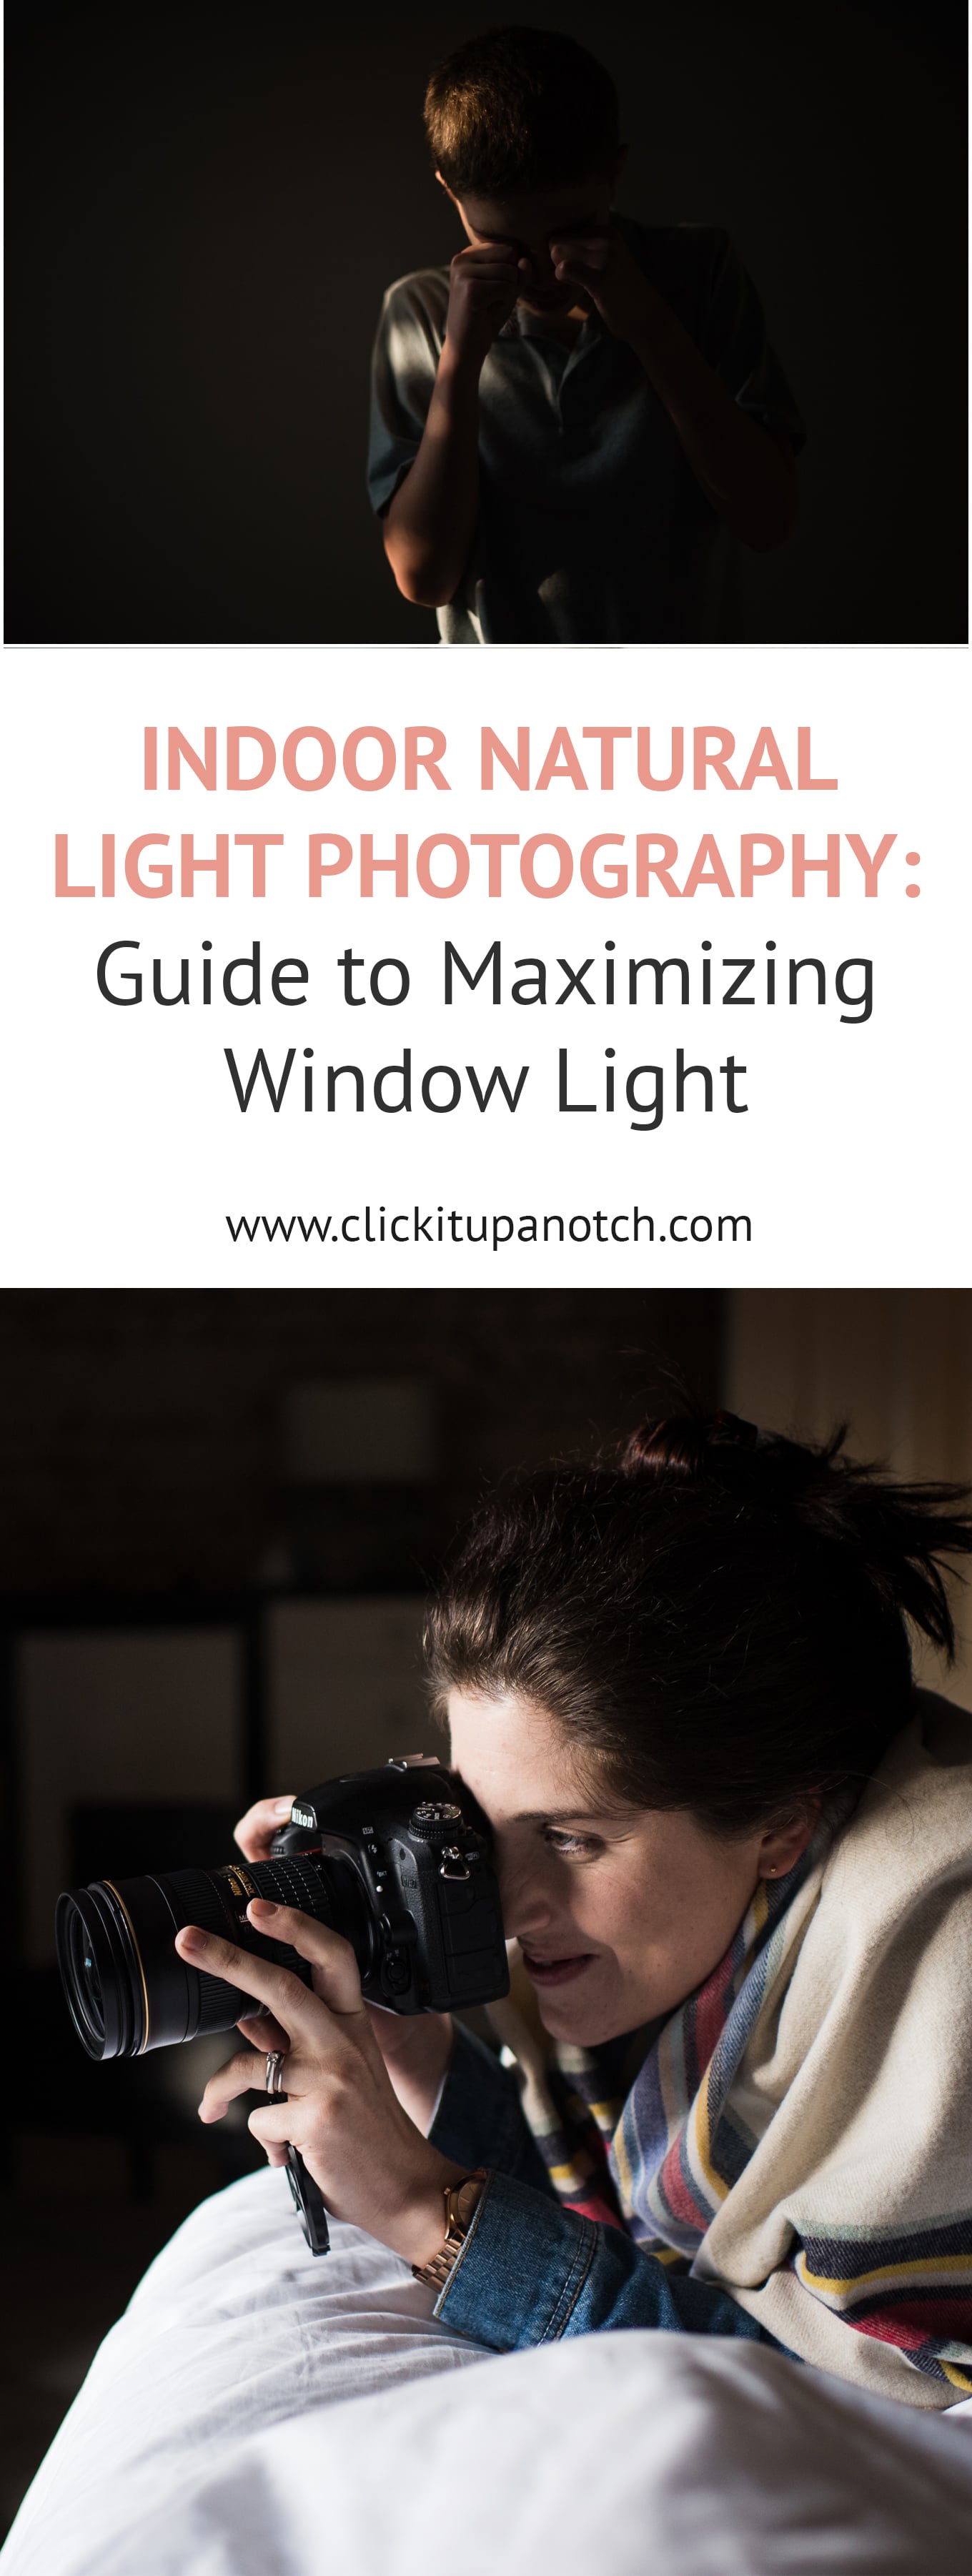 These are great ideas on how to use window light creatively. Read -"Natural Light Photography Guide to Maximizing Window Light"